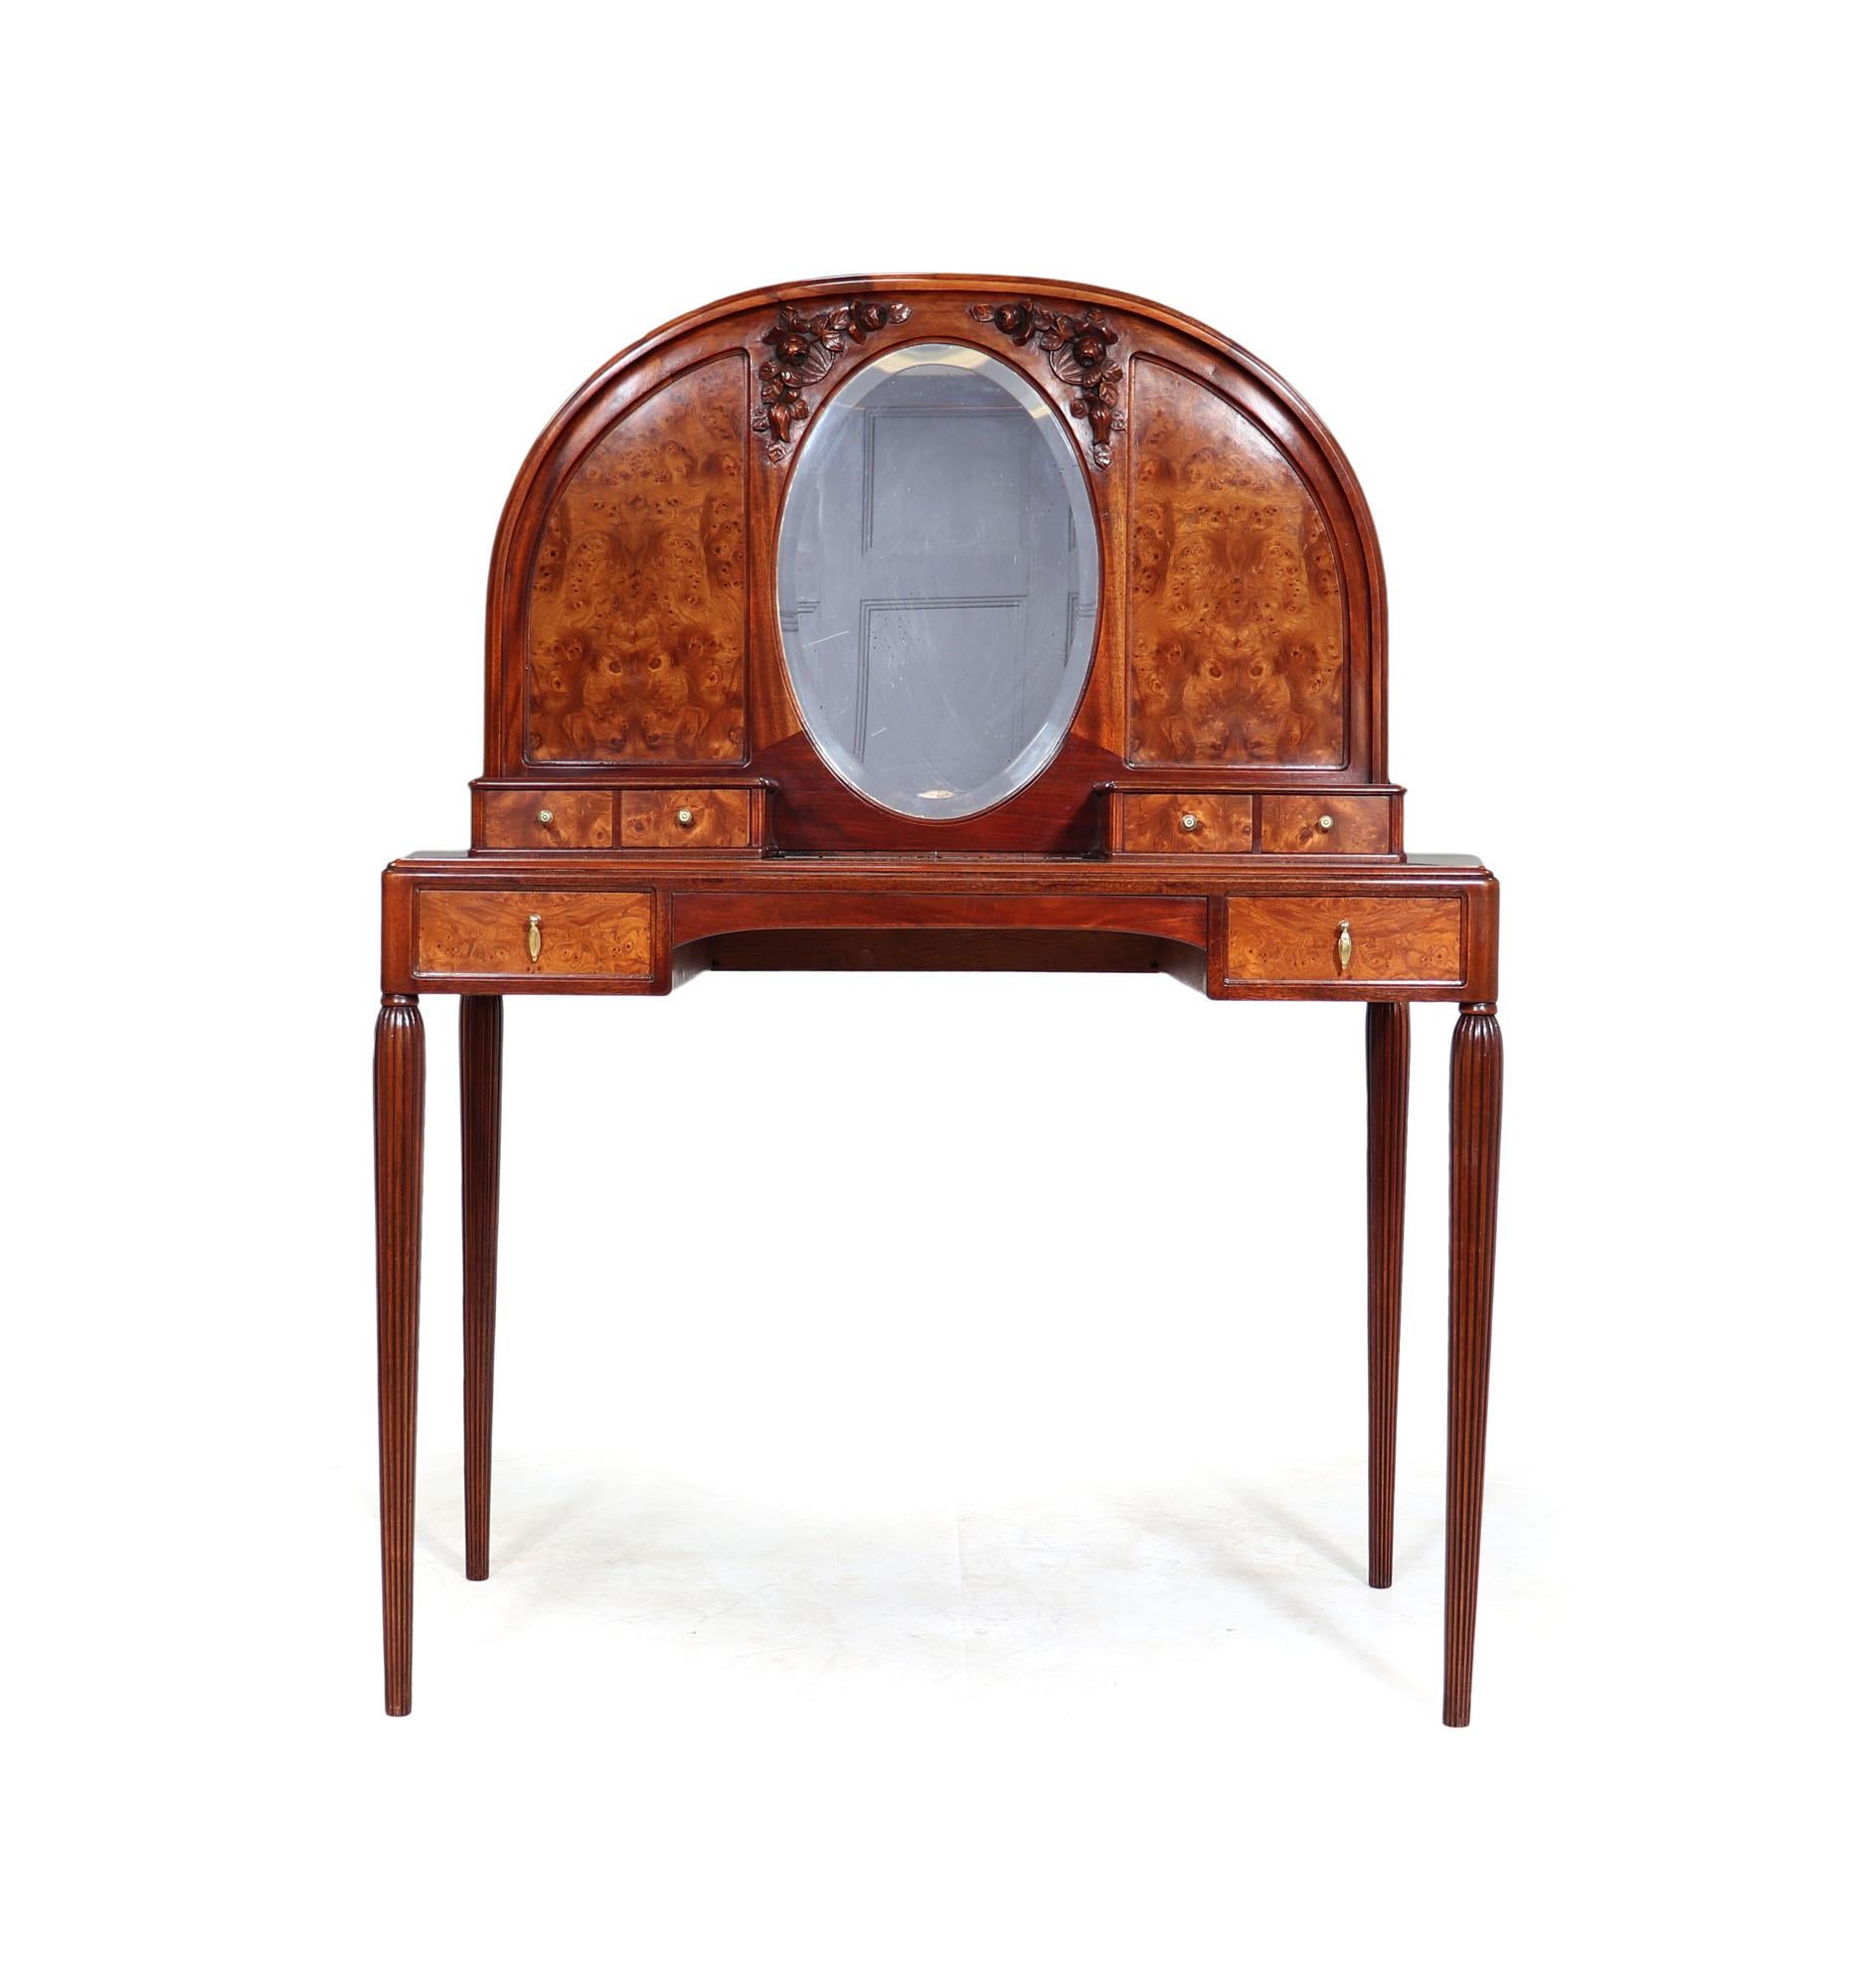 Art Nouveau dressing table
This French Art Nouveau dressing table is made of high quality Burr Elm wood and Mahogany. The table is intricately designed with oval bevelled mirror surrounded by beautiful carving work. The dressing table is the